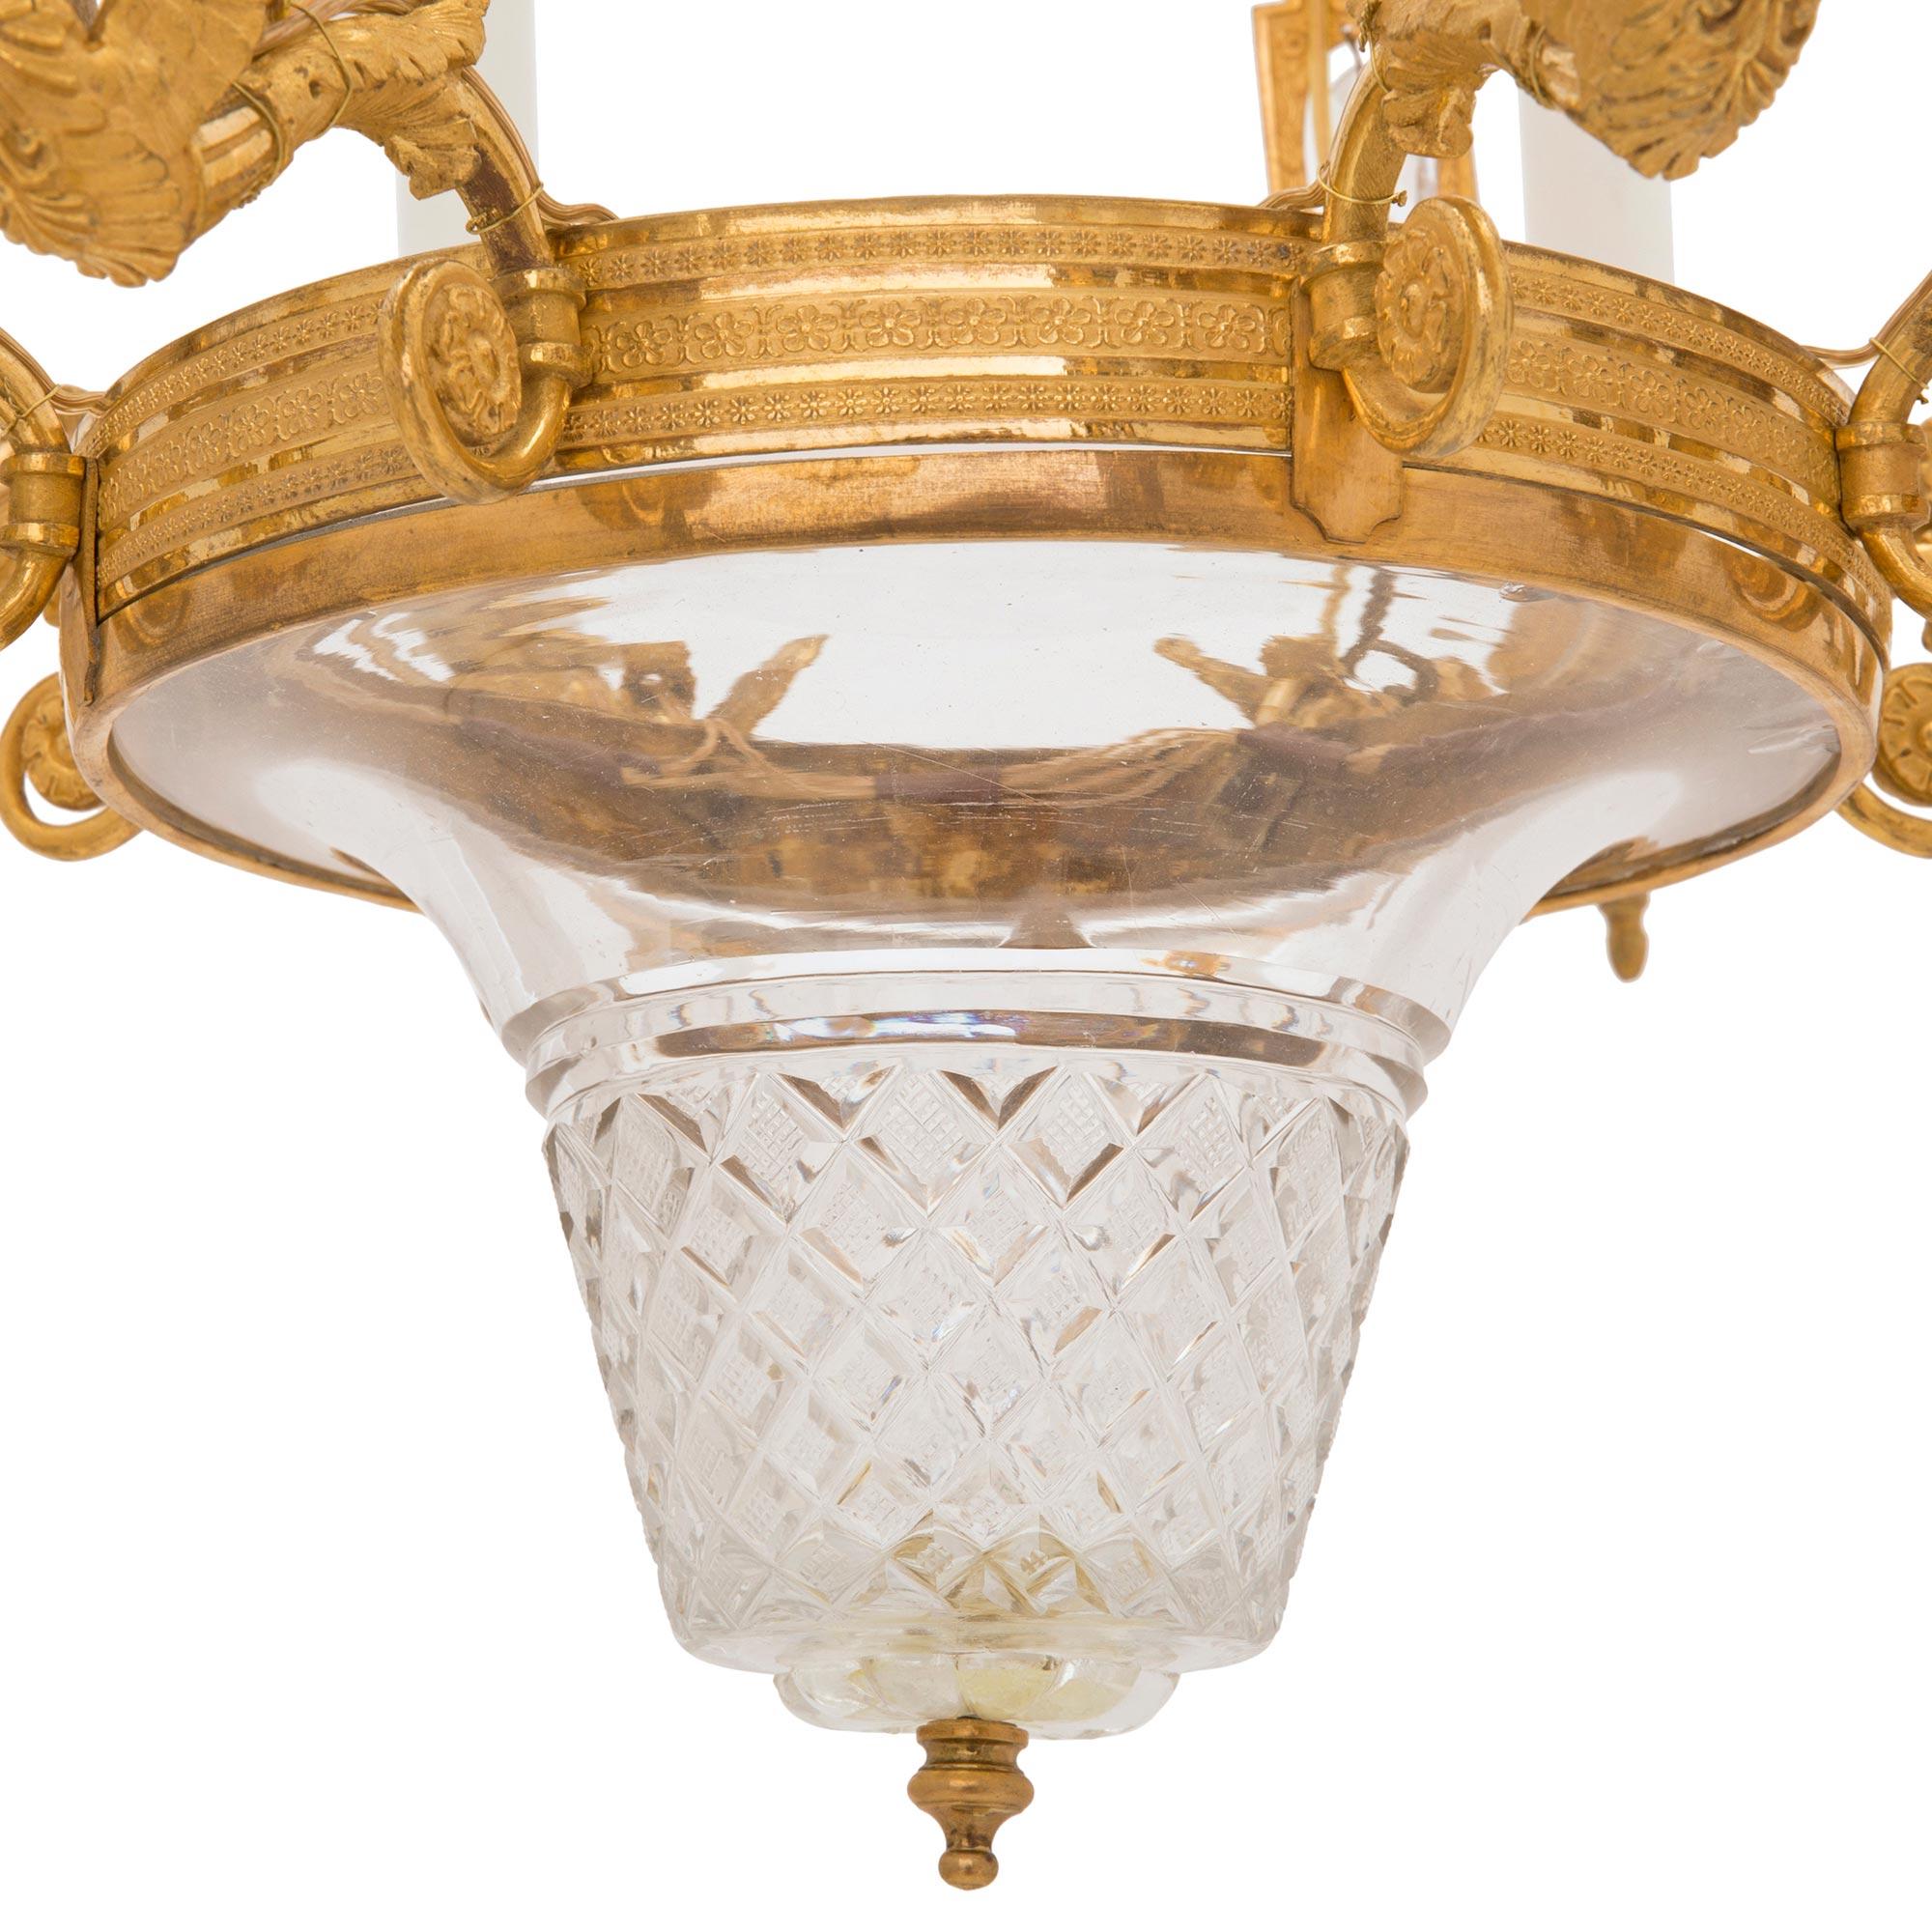 French Early 19th Century Empire Style Ormolu and Baccarat Crystal Chandelier For Sale 4